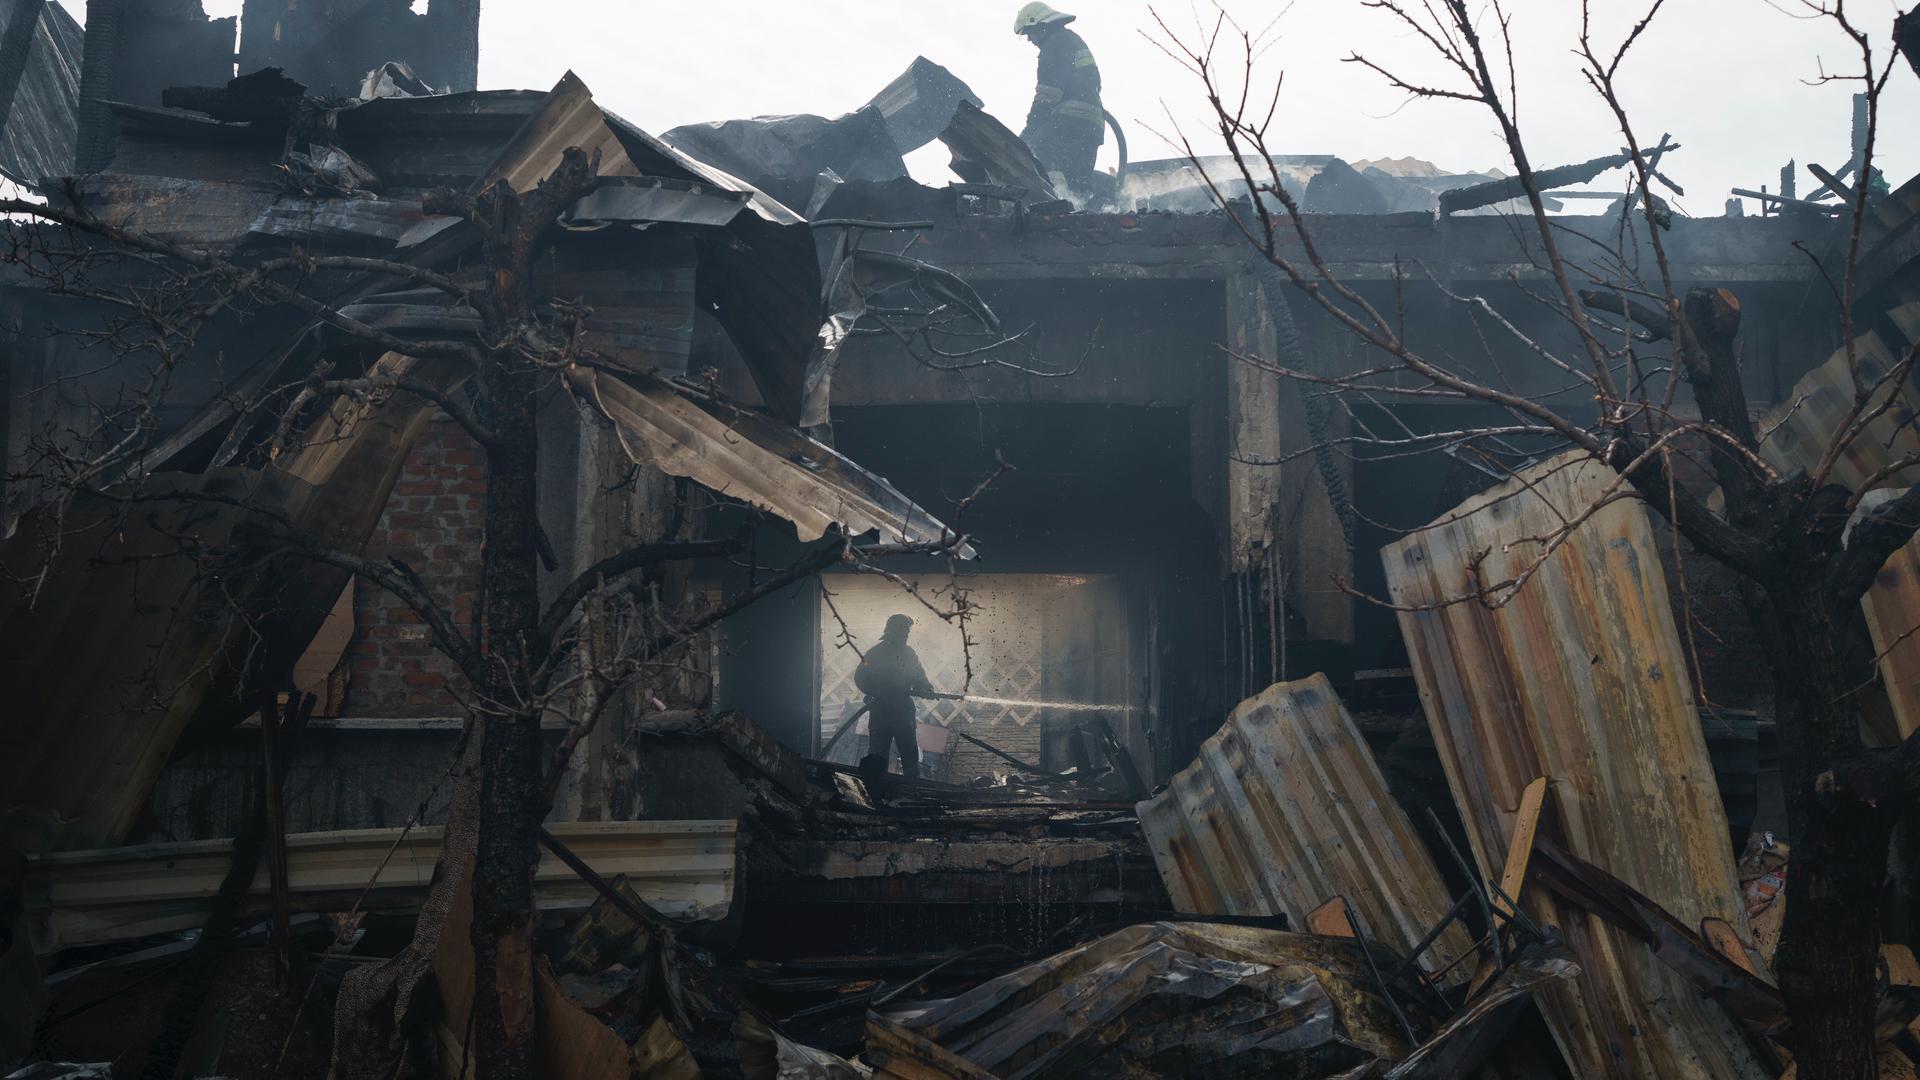 Firefighters work to extinguish a fire at a house after a Russian attack in Kharkiv, Ukraine, April 11, 2022. 